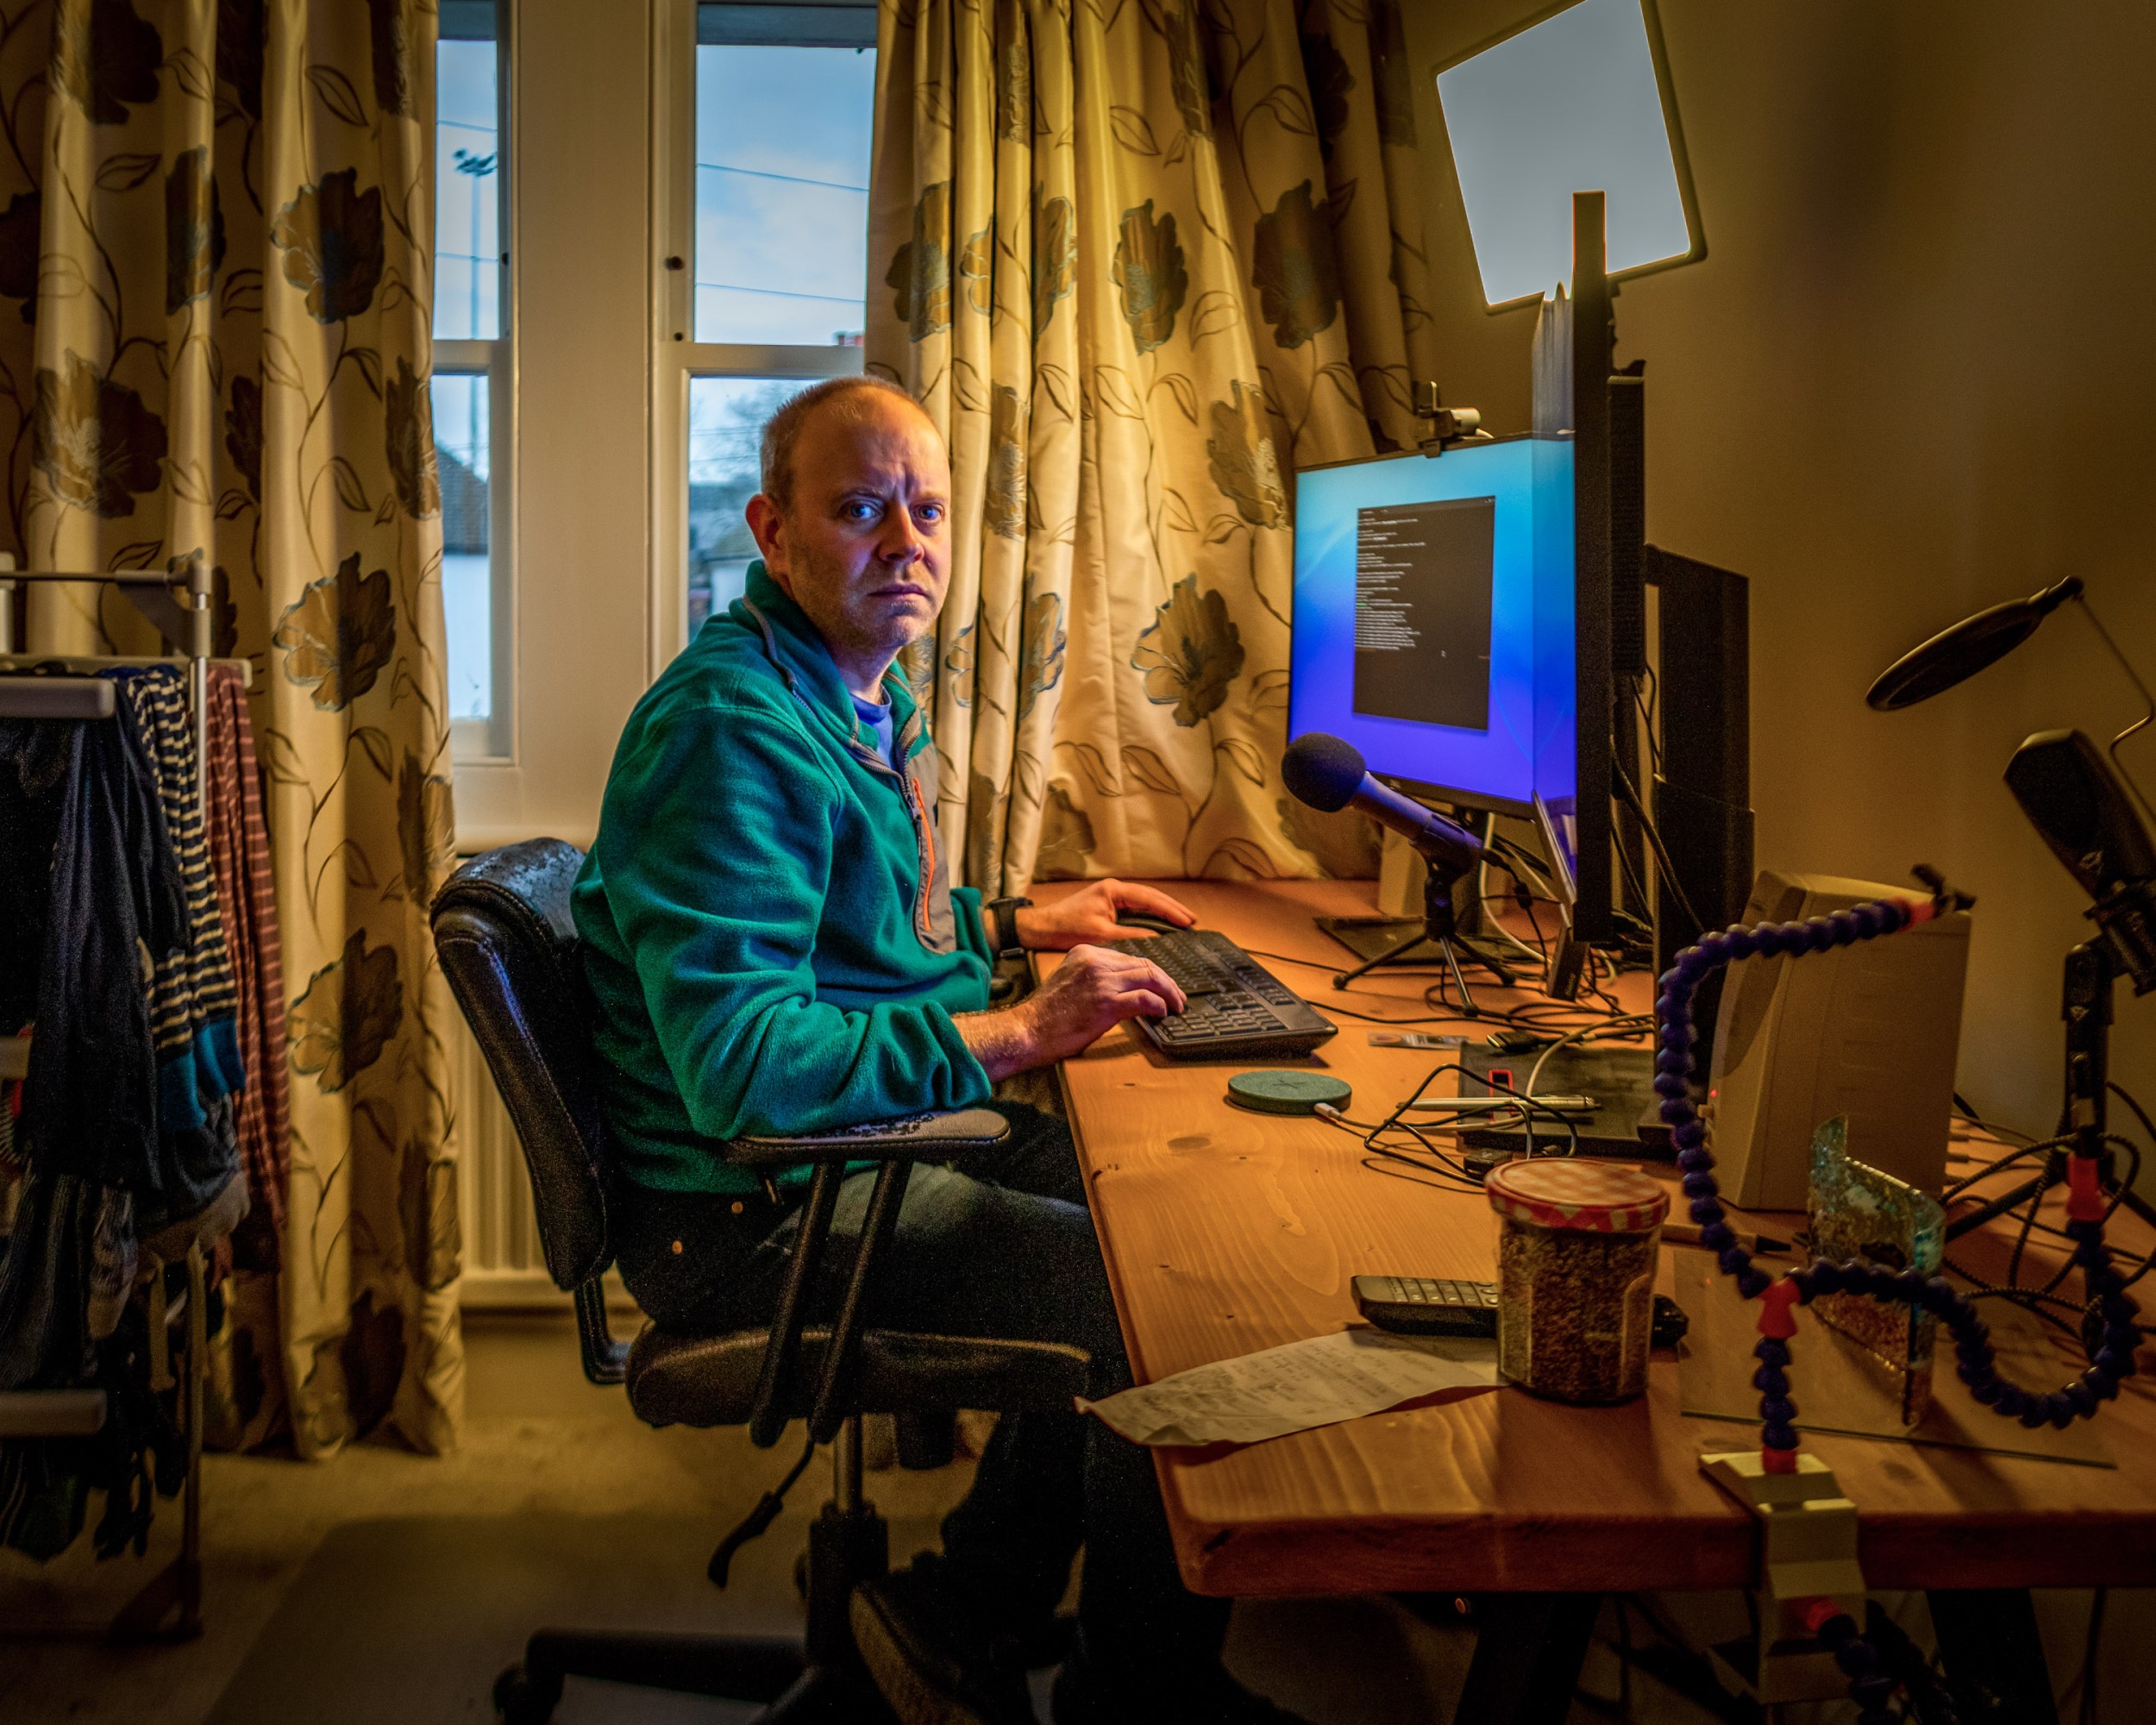 James, a 46 year old computer engineer, working at his home computer